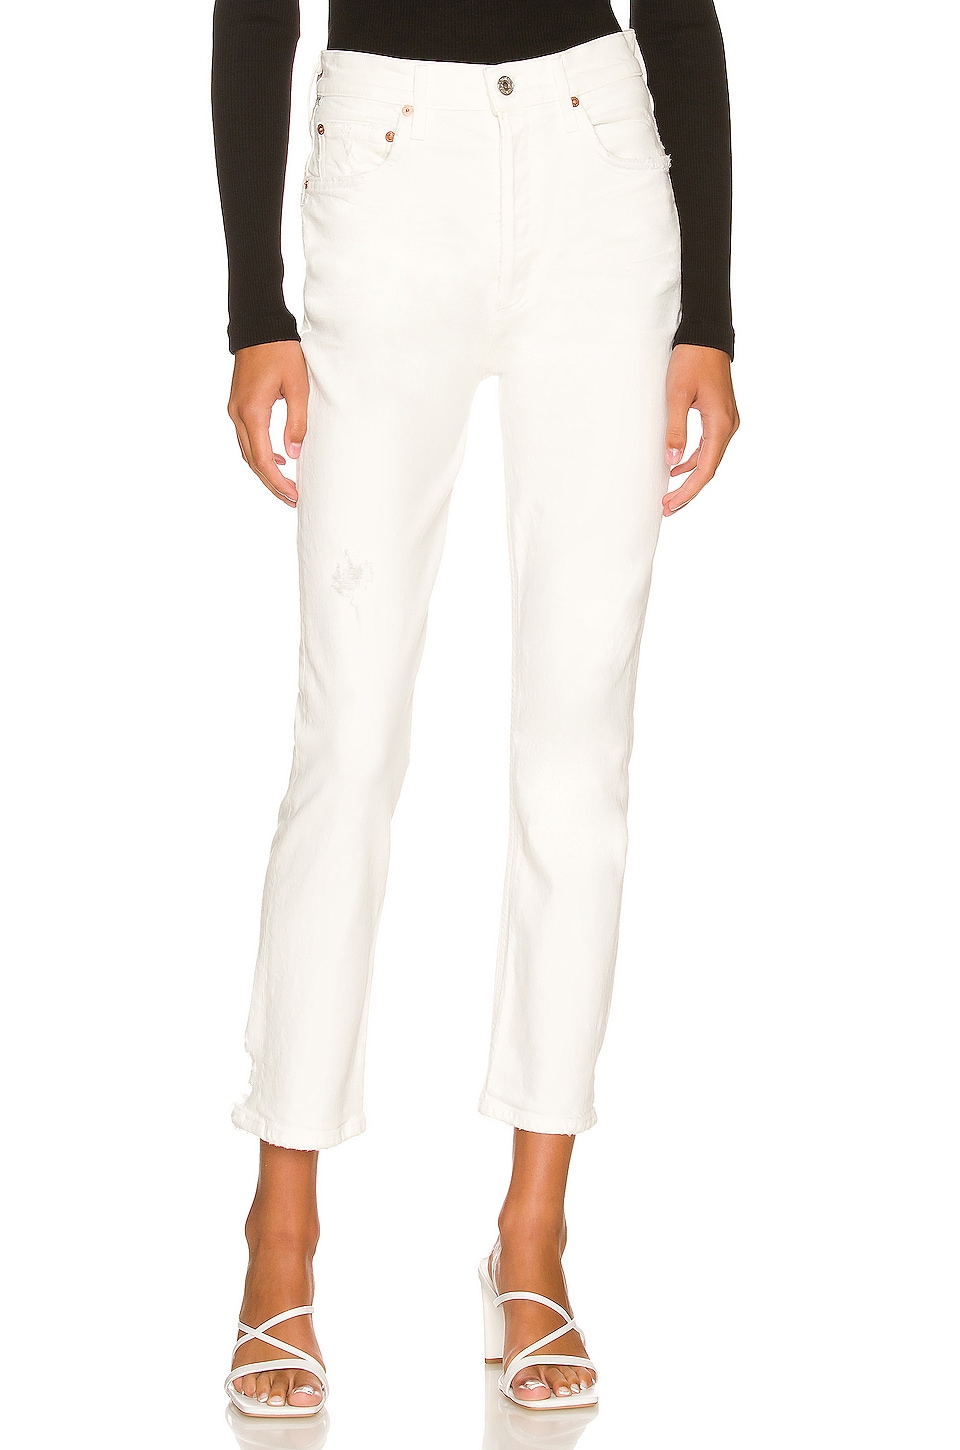 Citizens of Humanity Jolene High Rise Vintage Slim in White Out | REVOLVE